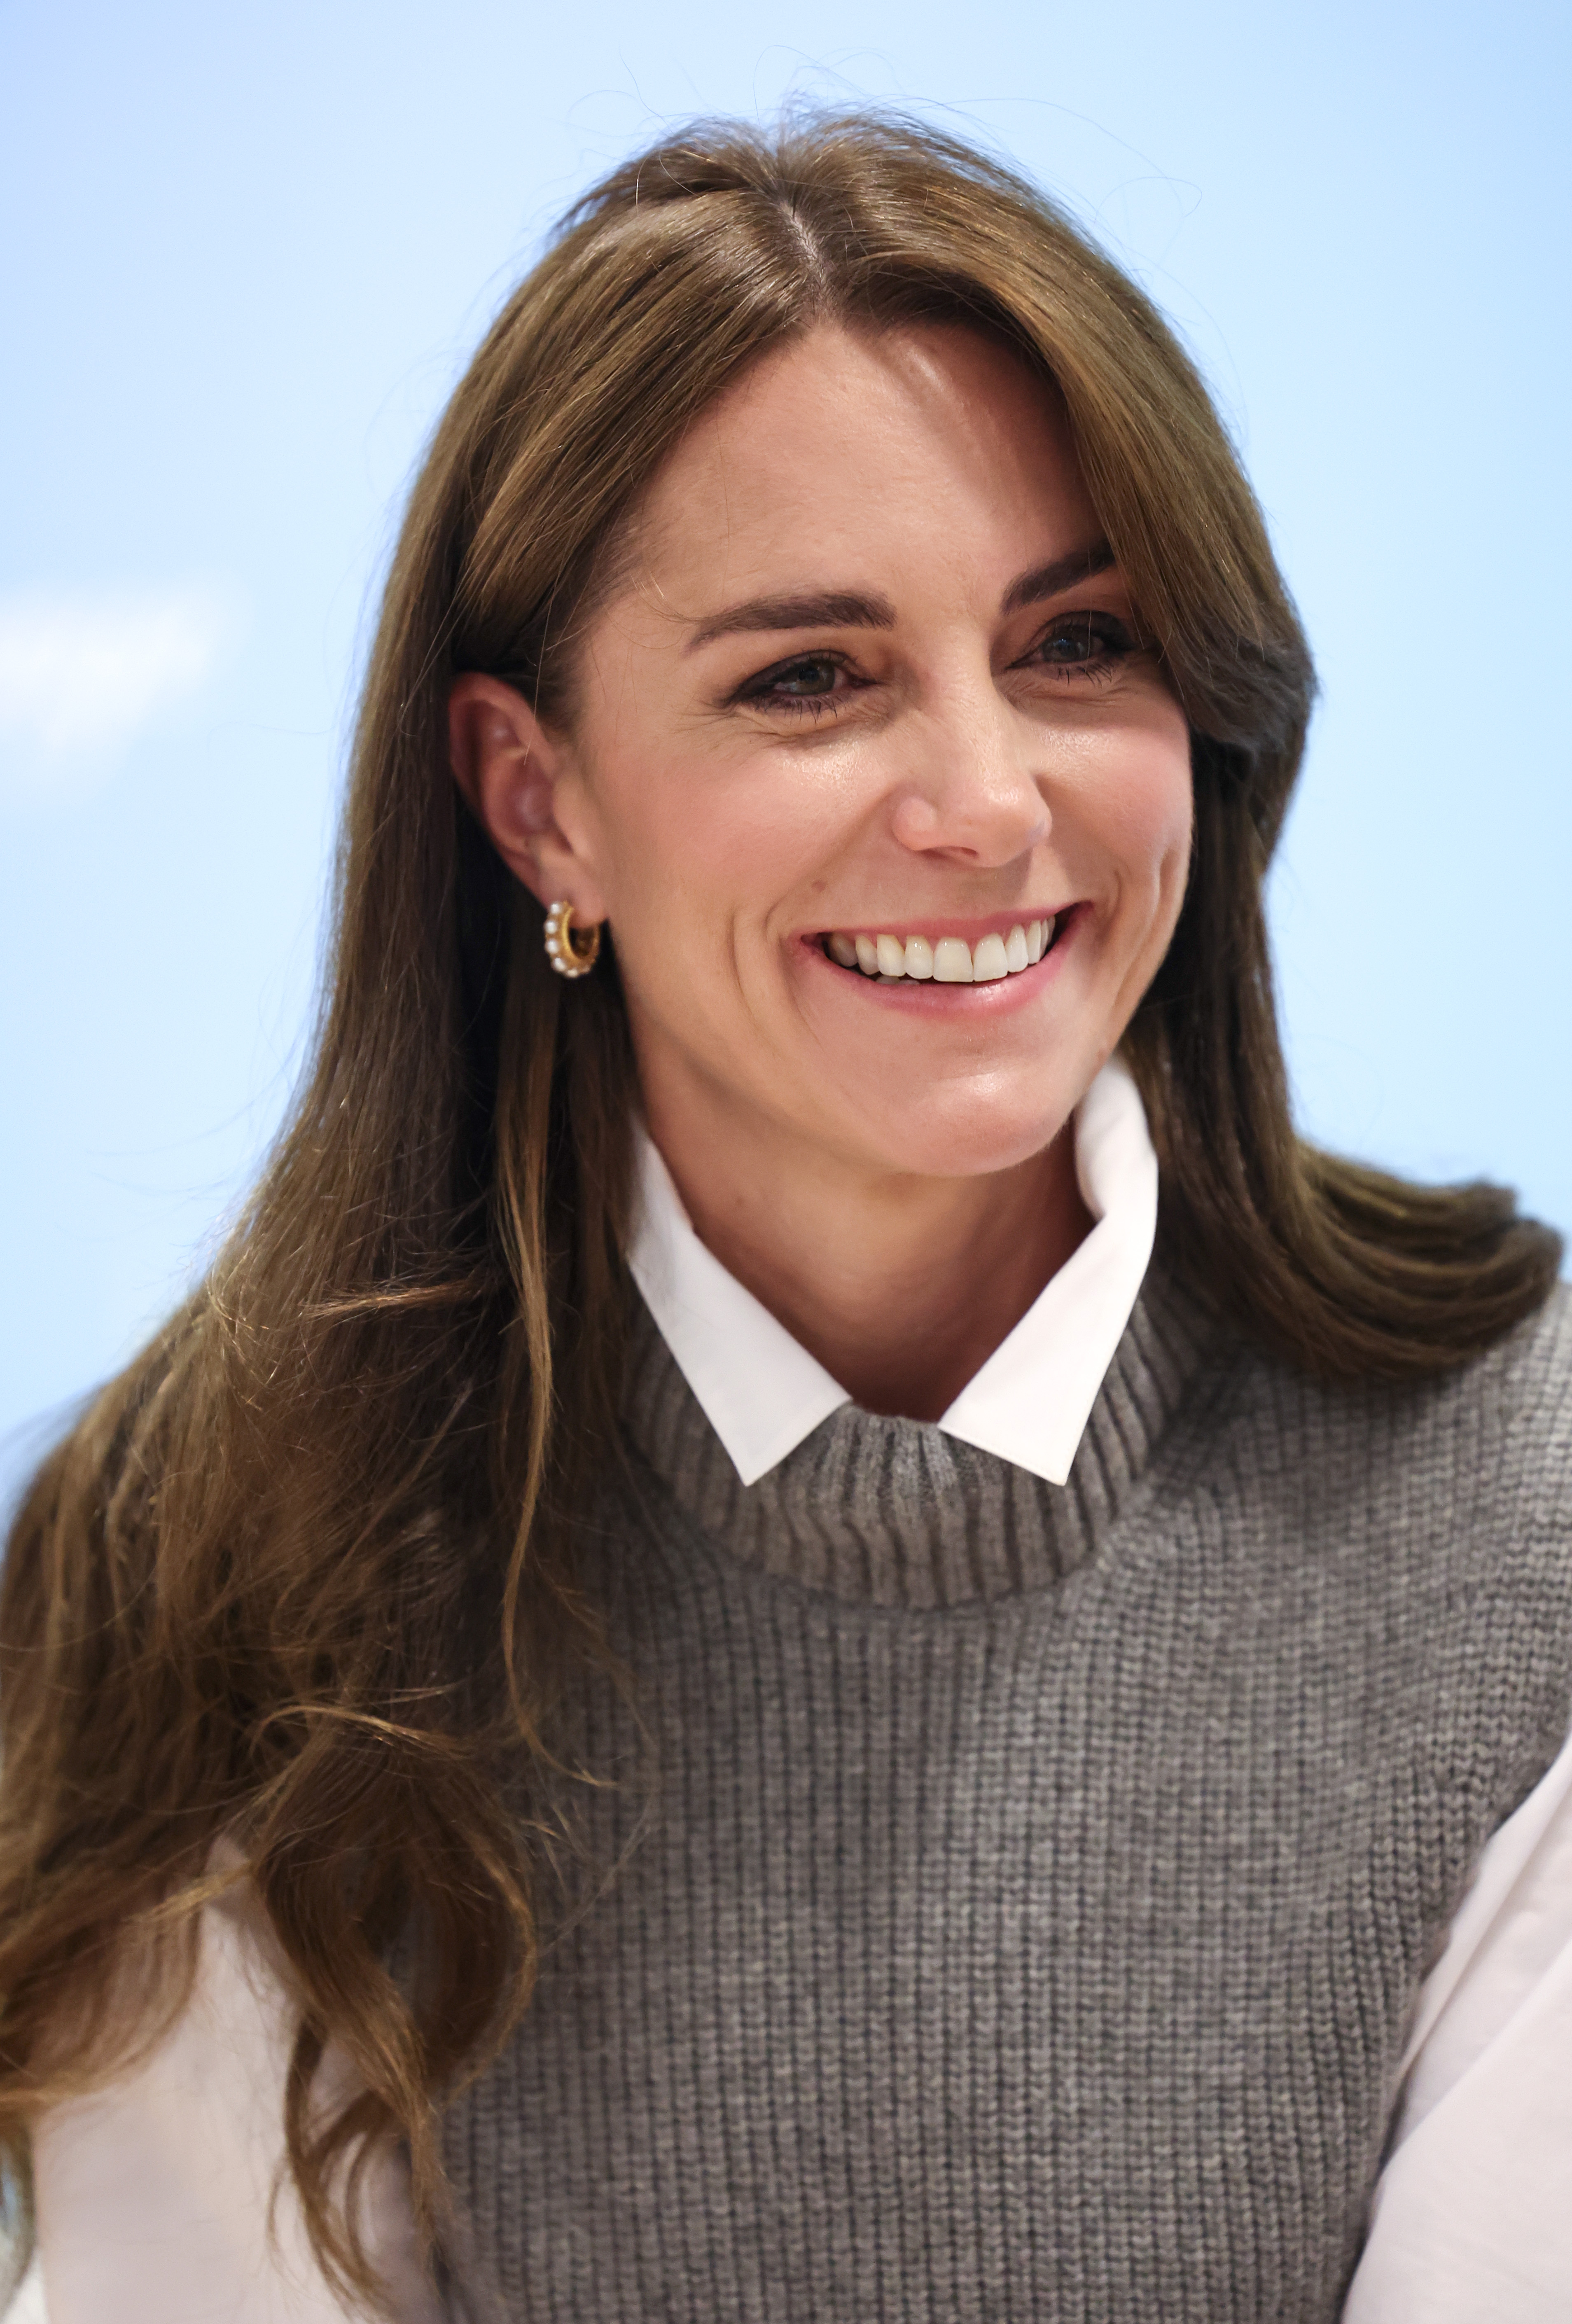 Kate Middleton Wore an Autumn Sweater-Vest-and-Shirt Look | Who What ...